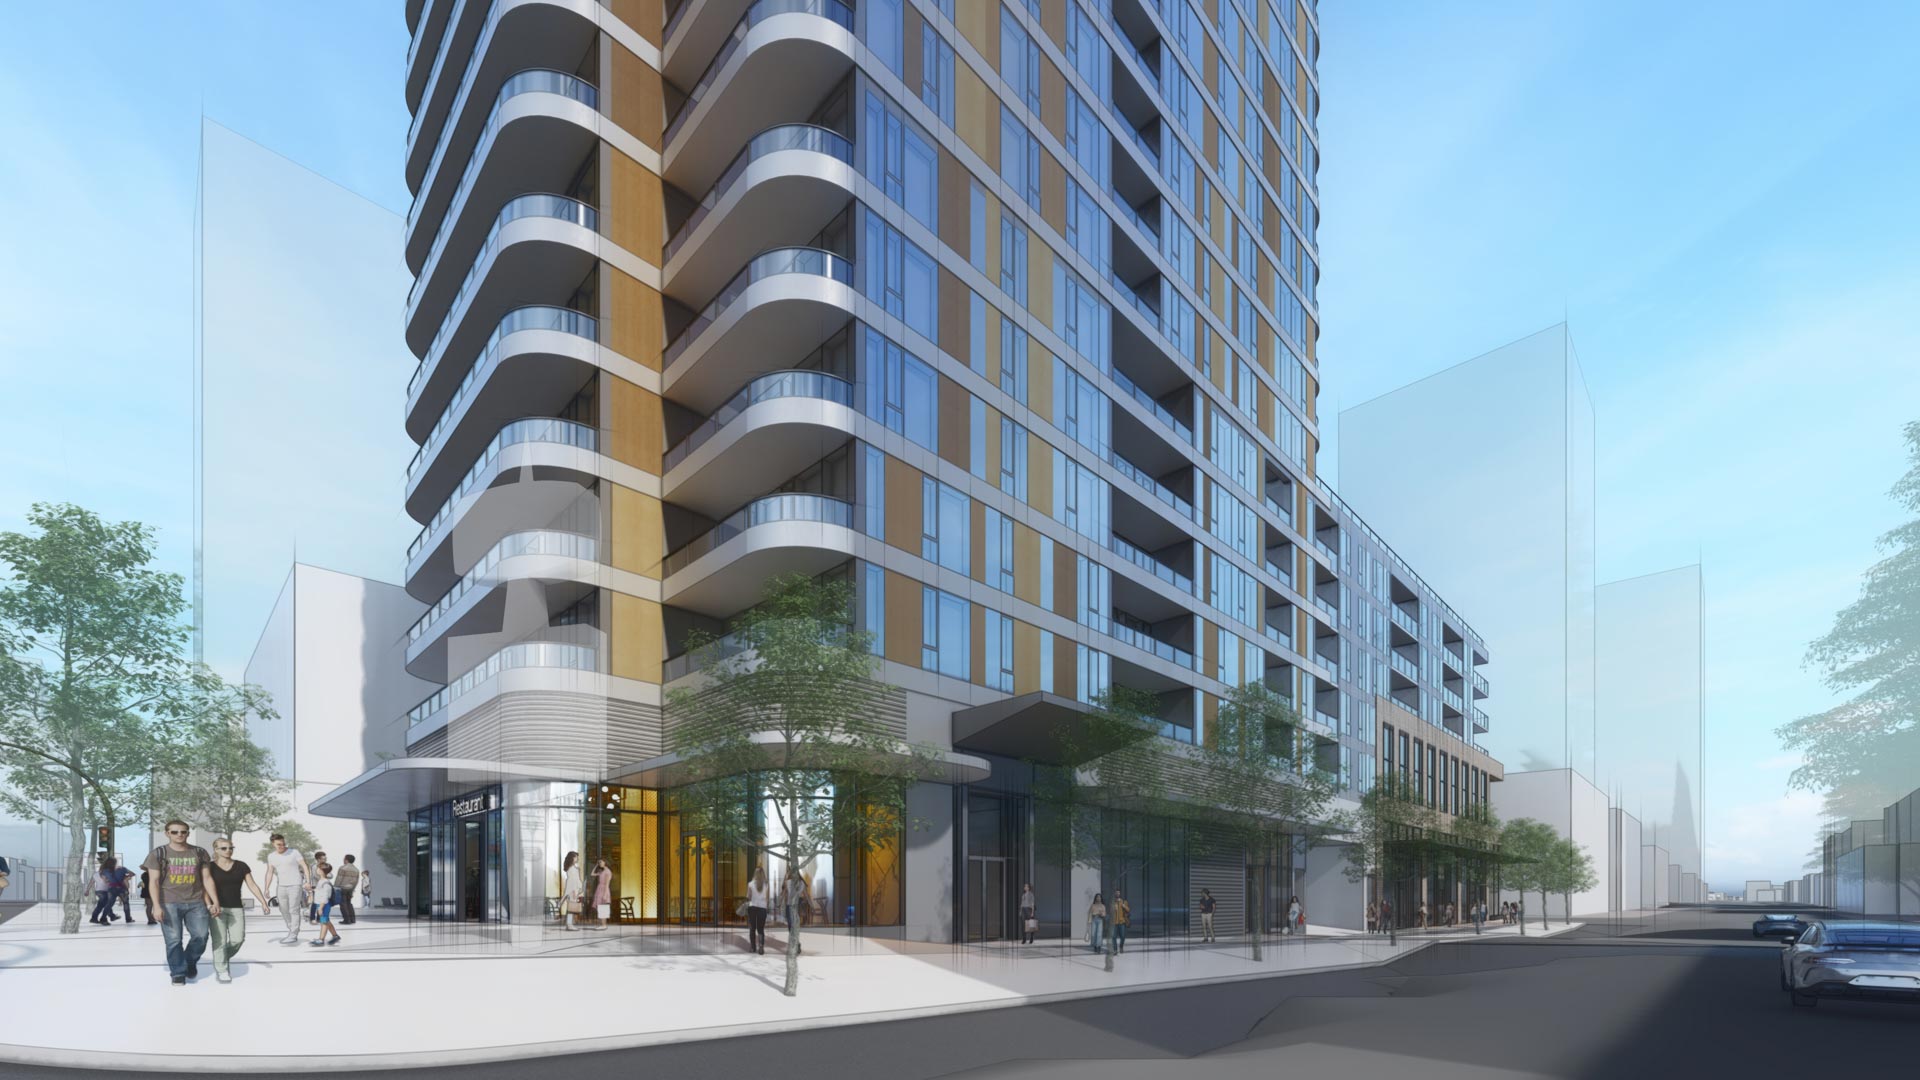 A rendering of the proposed Arbutus Station development's northwest corner